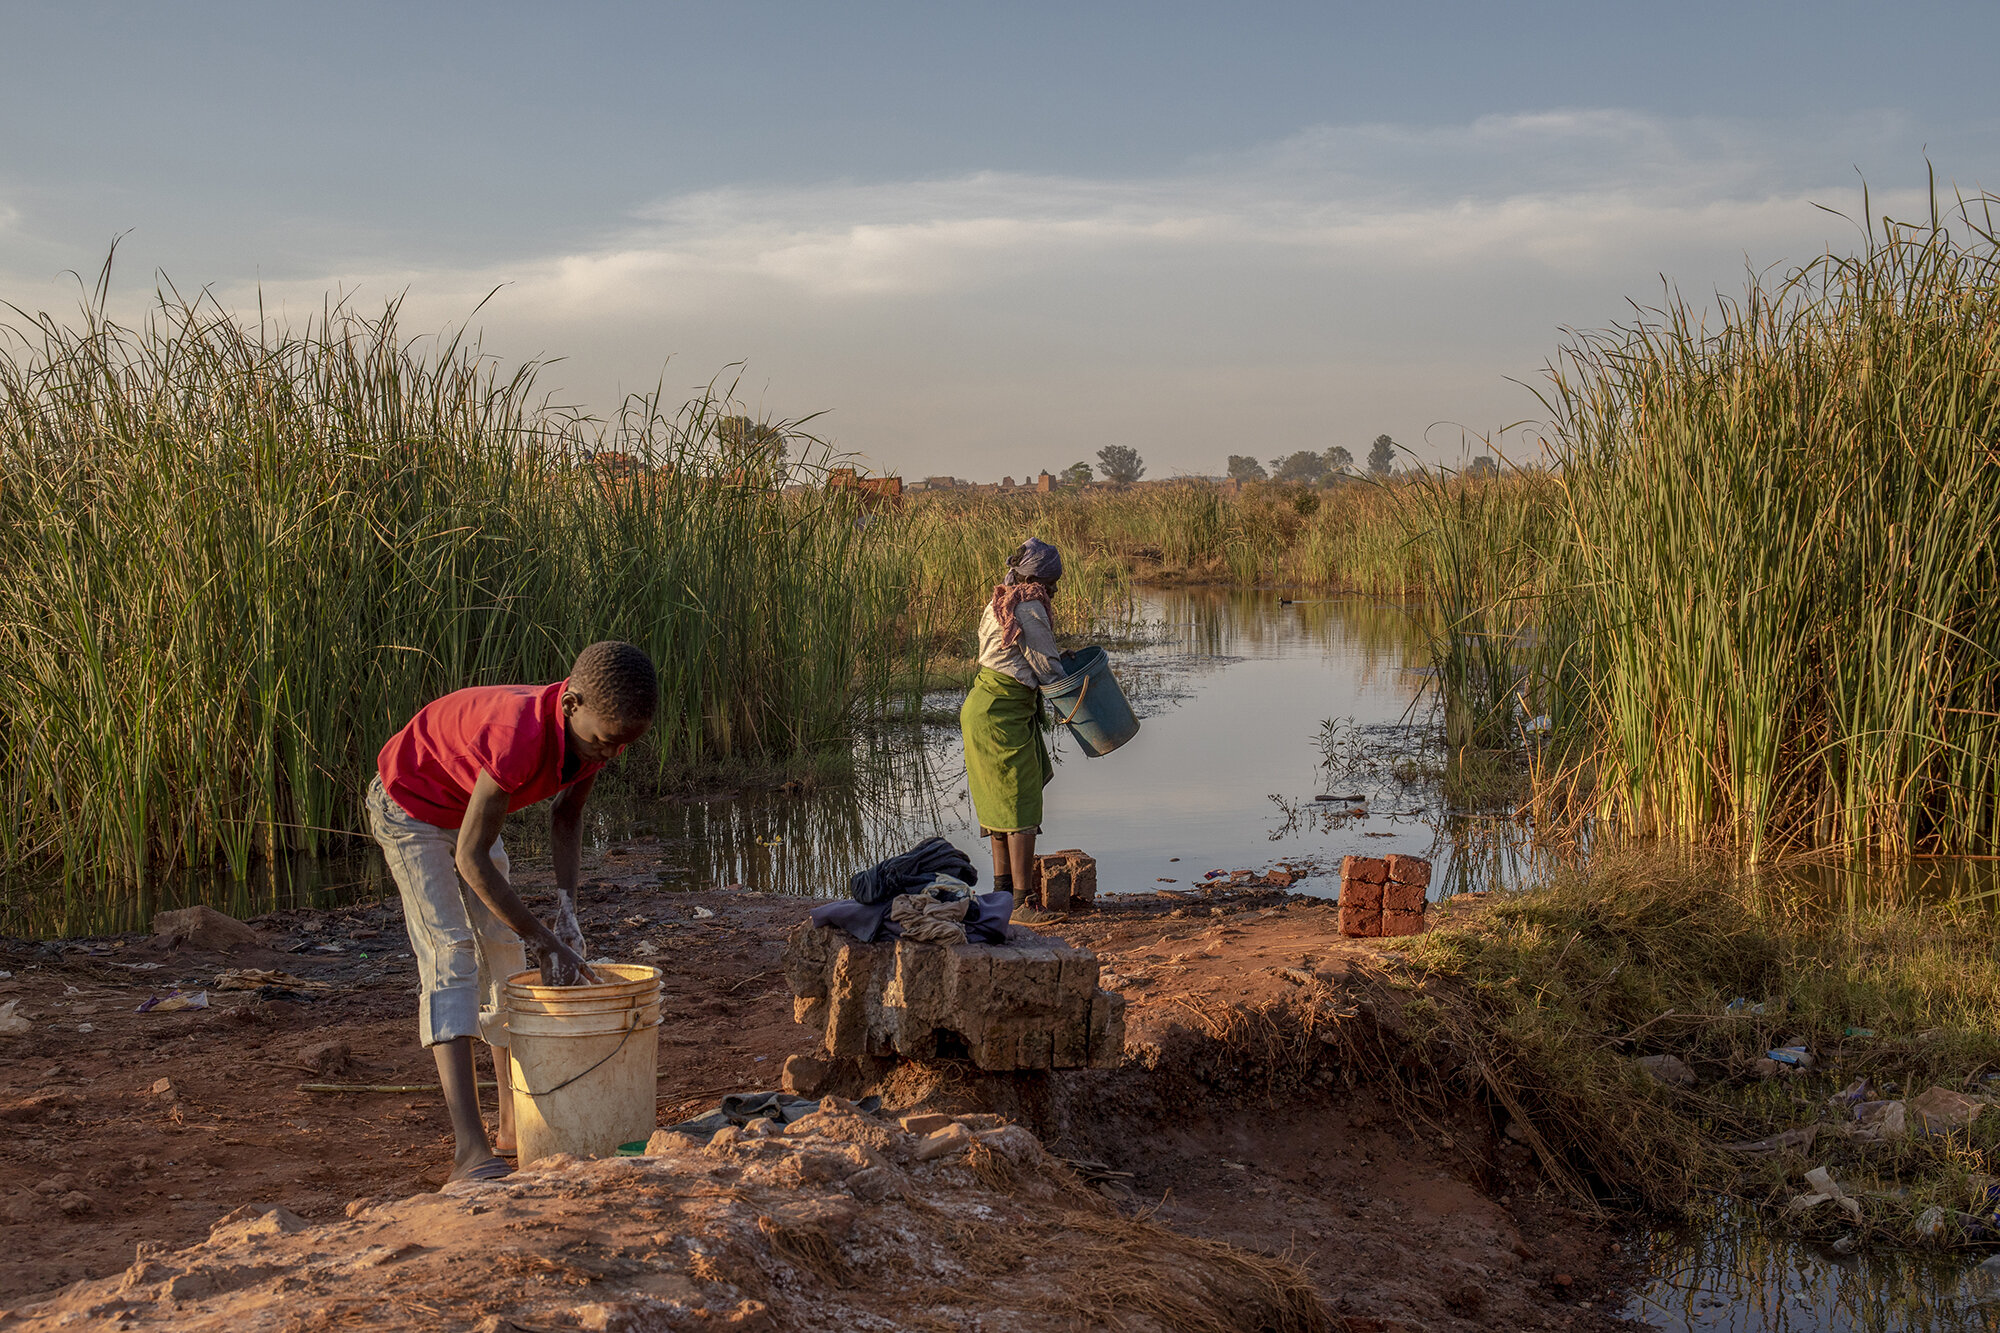  October 8, 2018: Rekina walks to a man-made dam near her home to fetch water for washing her dishes and clothes. The area is rife with informal brick makers, that have created mini-dams in the process of digging sand to make bricks. Because the wate